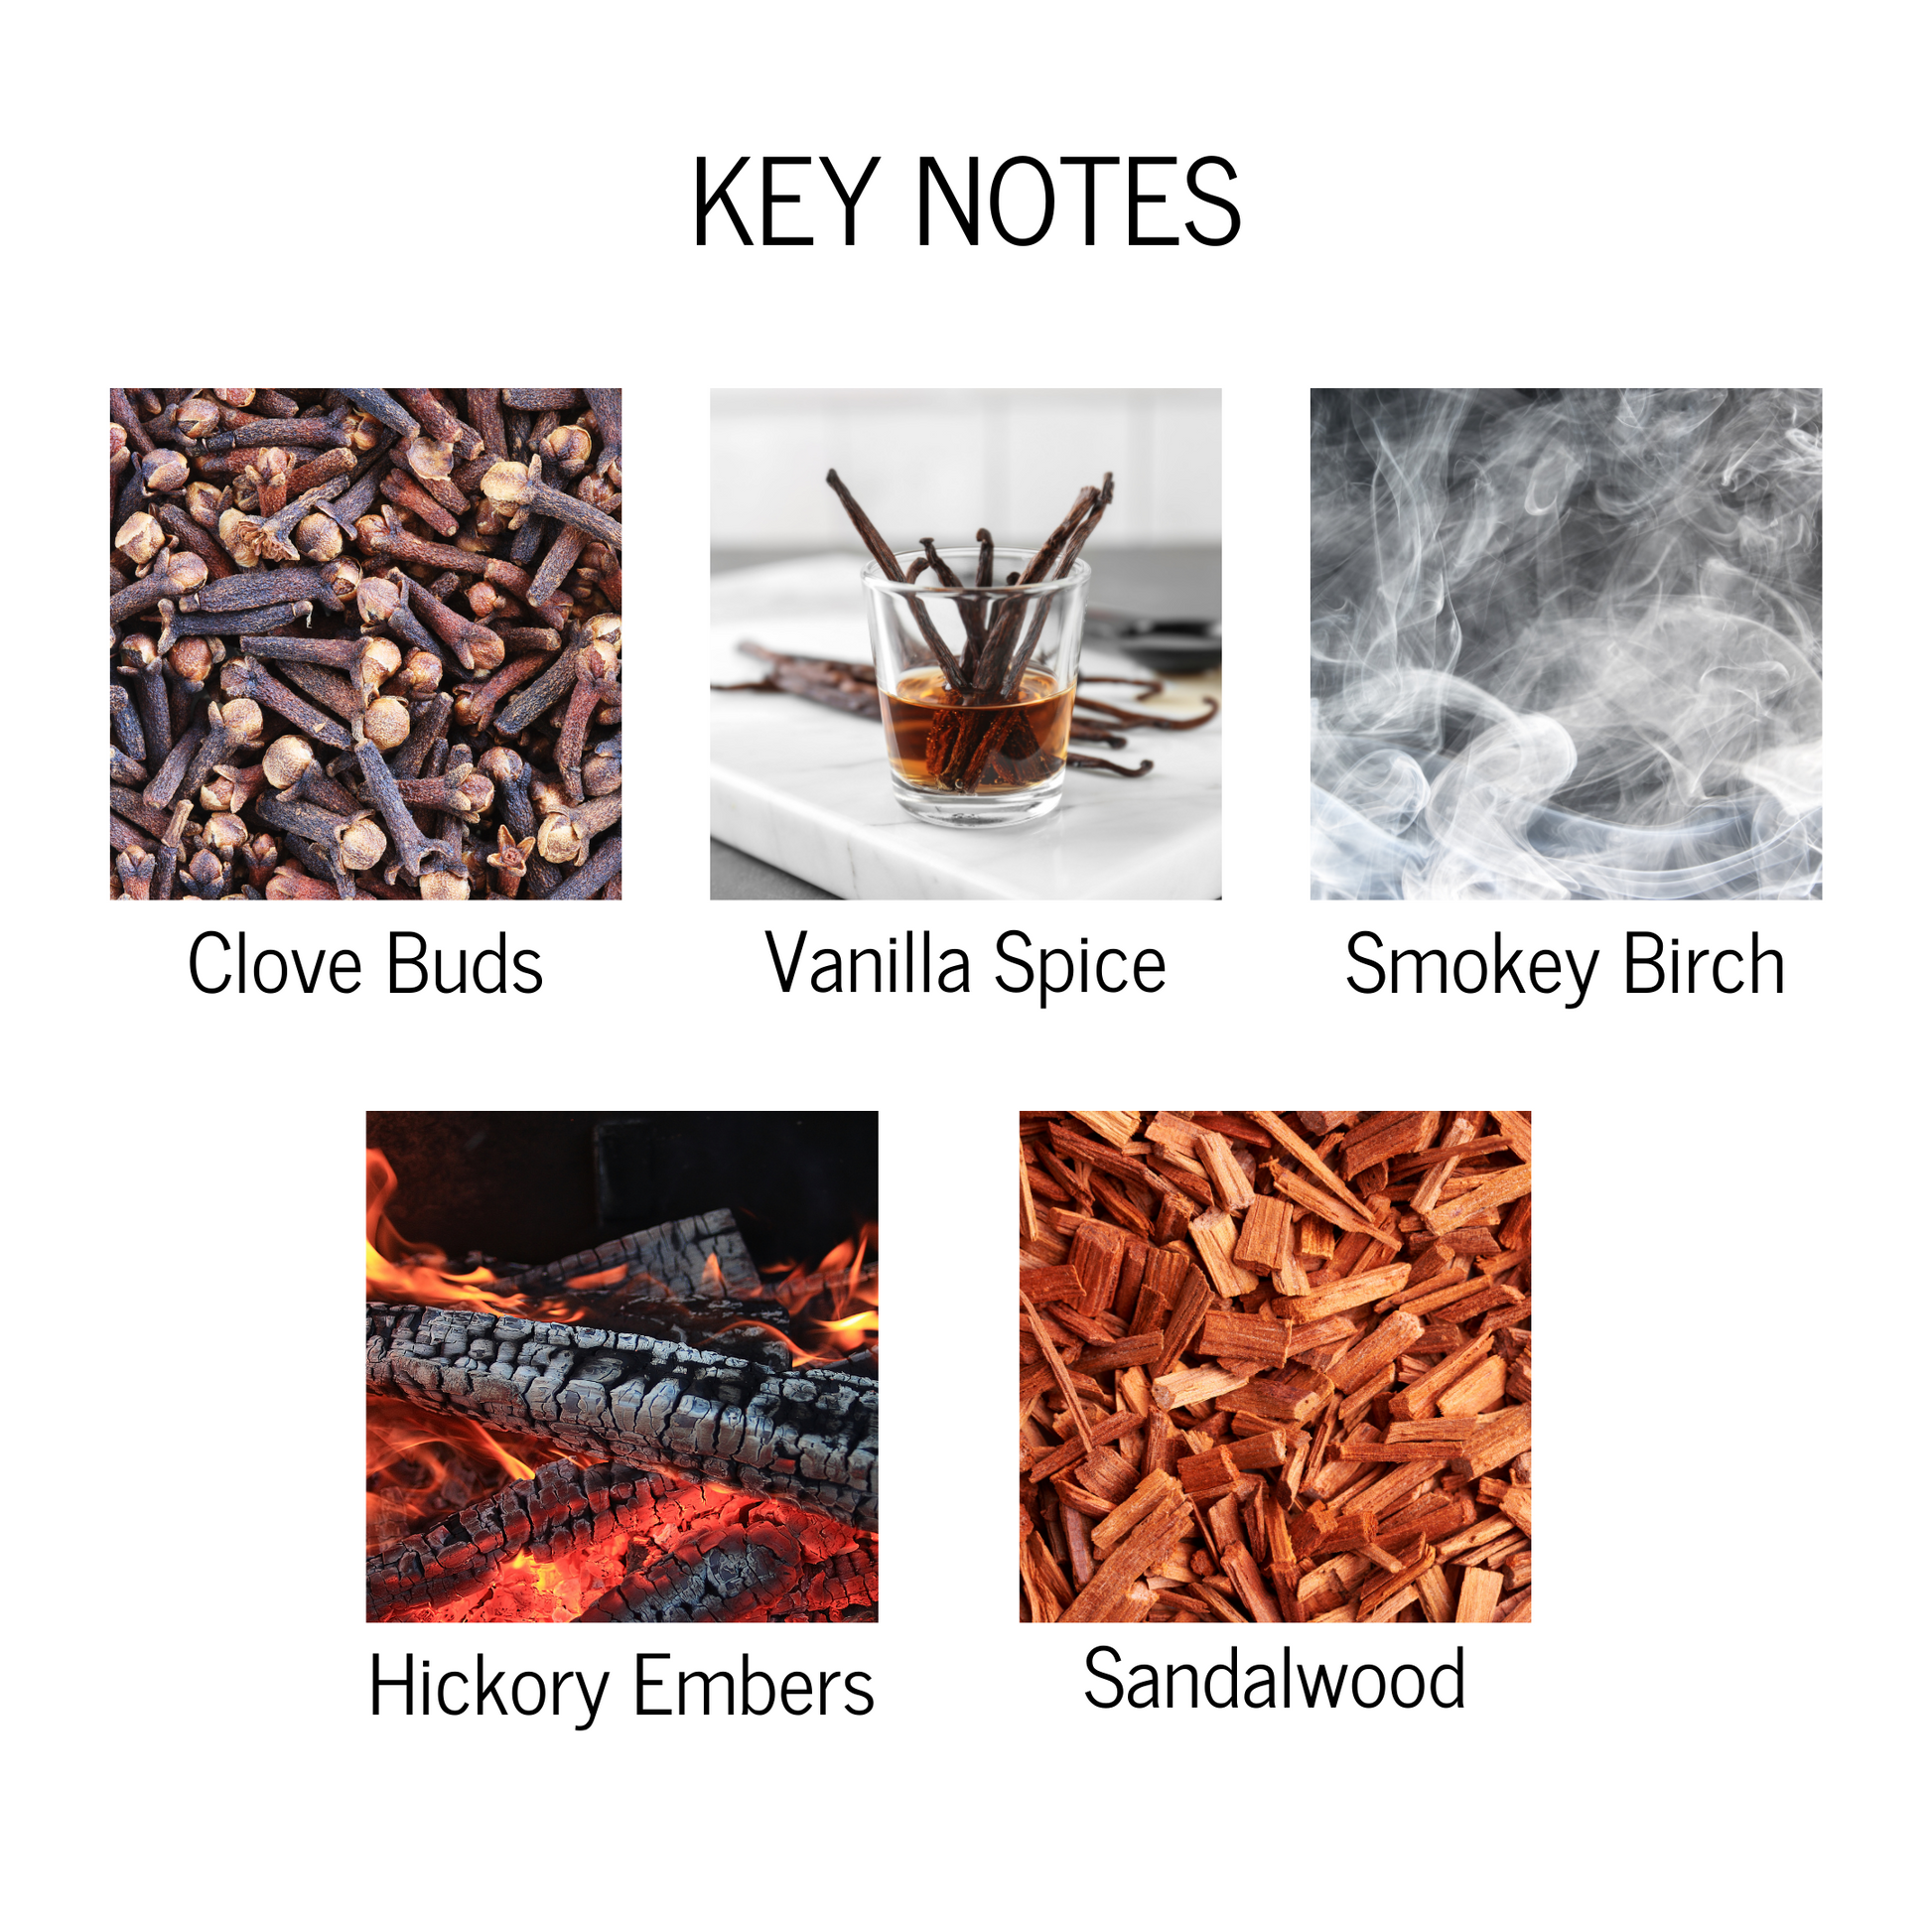 Key Notes of clove buds, vanilla spice, smokey birch, hickory embers and sandalwood